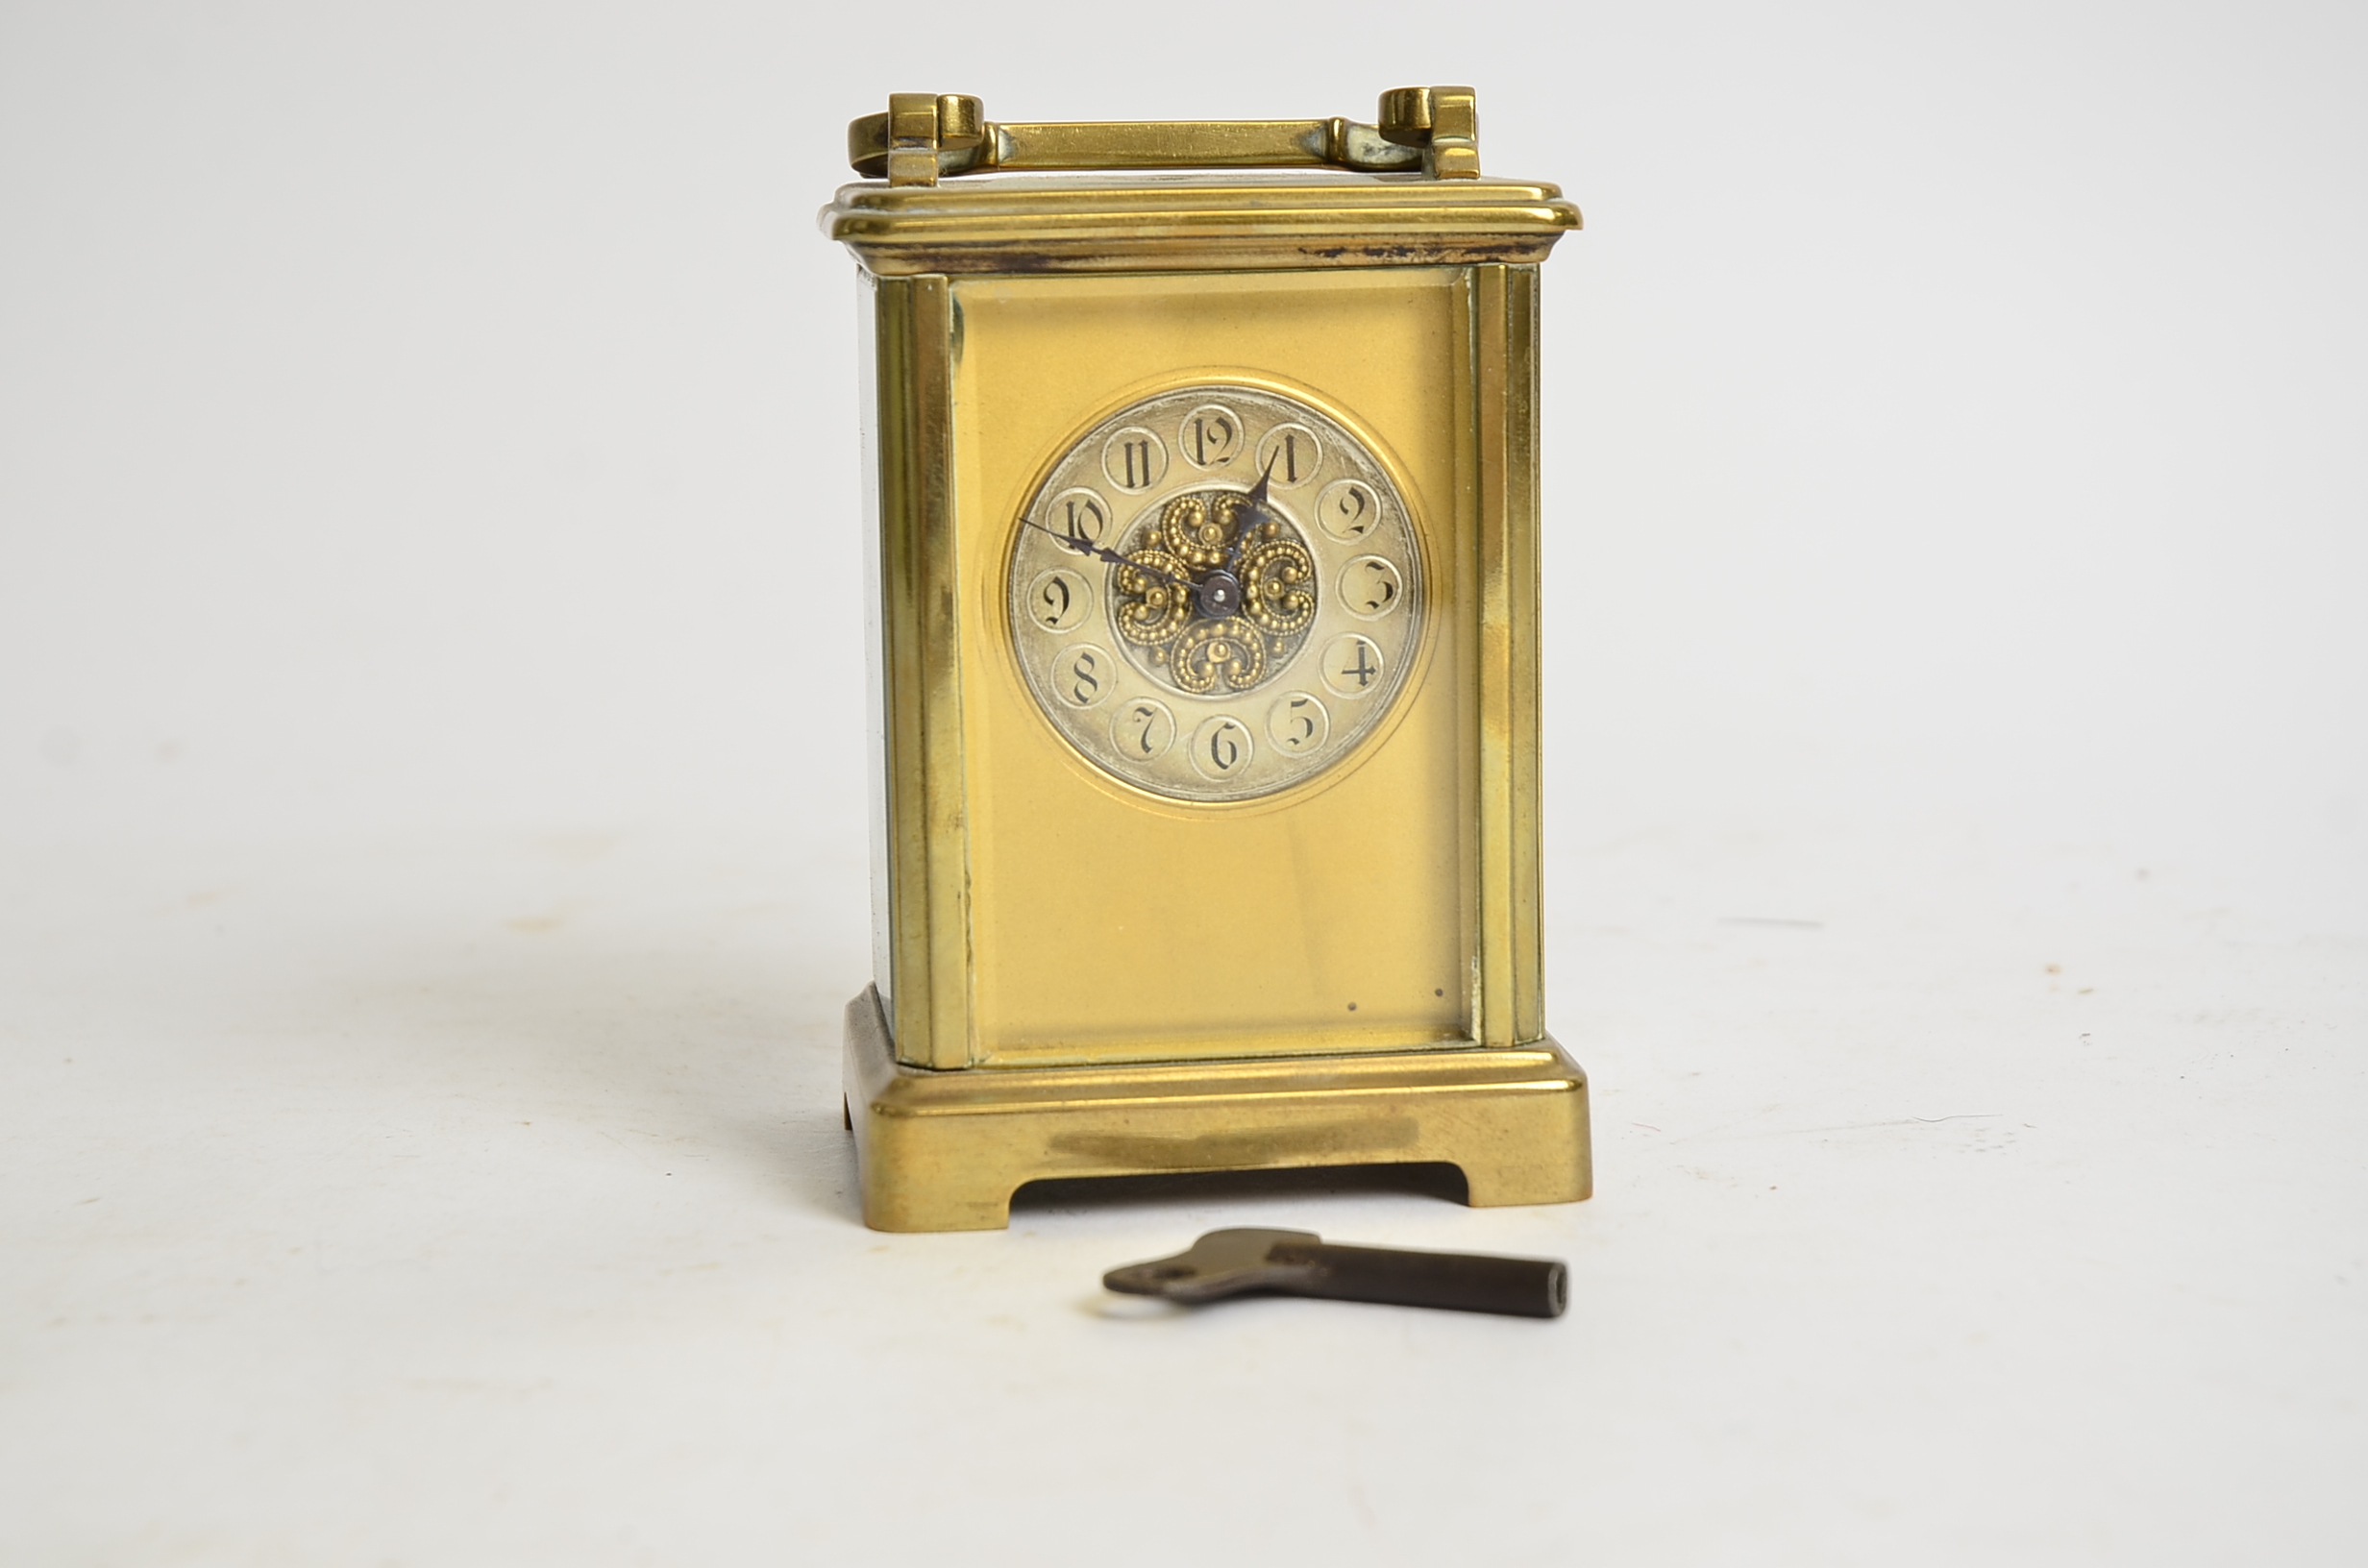 A brass carriage timepiece, the dial with Arabic numerals and decorative central panel, height